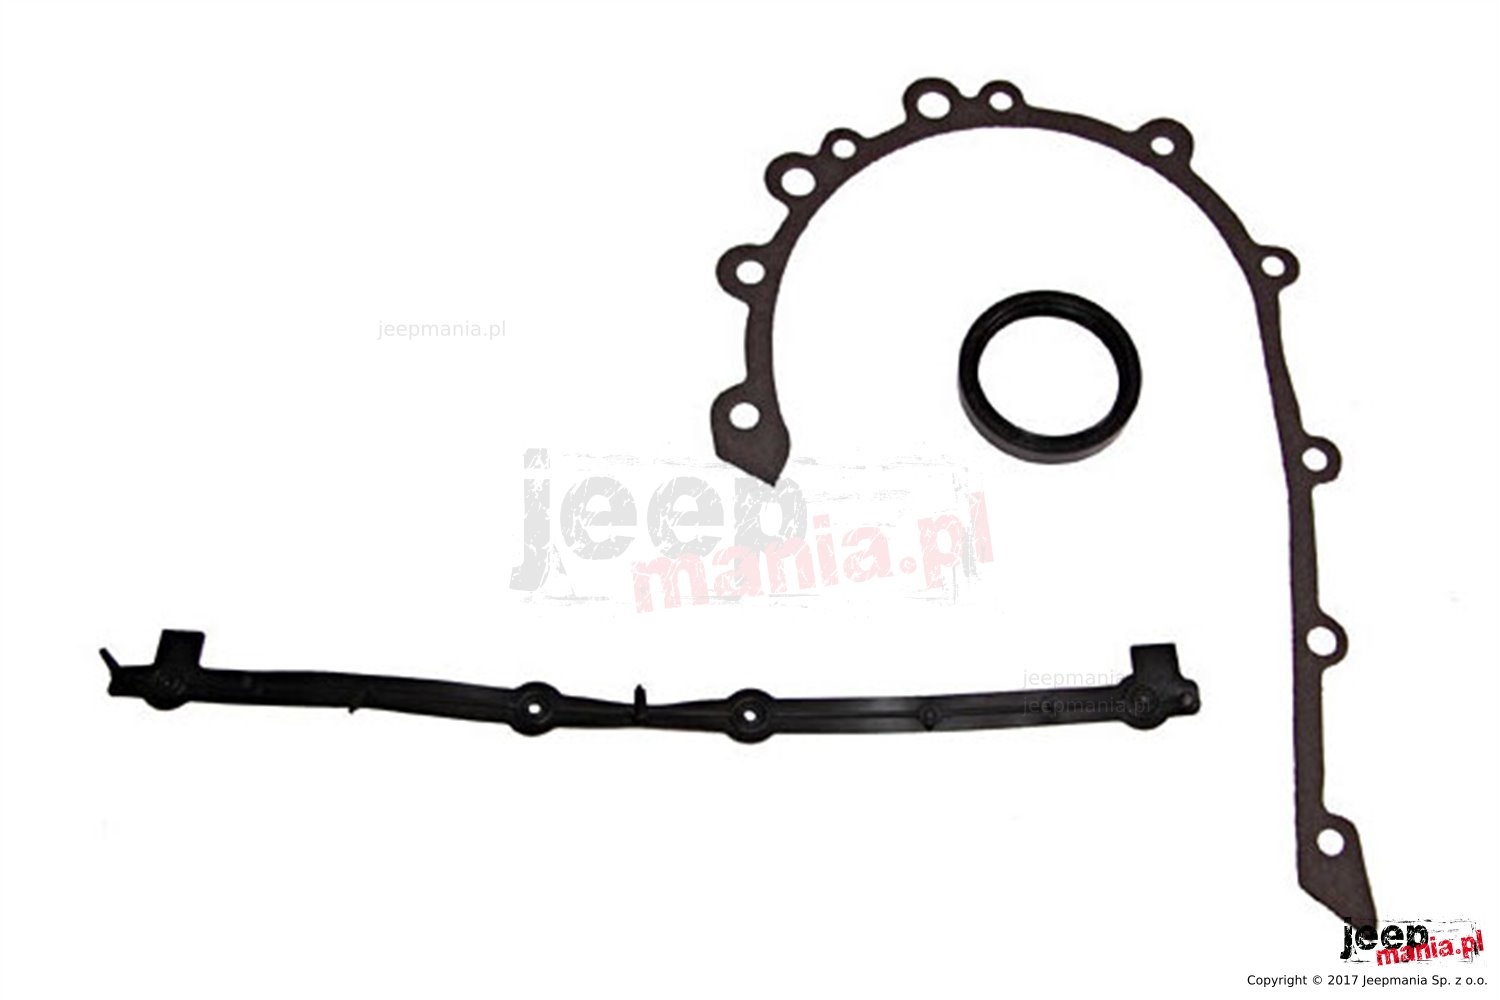  Timing Cover Gasket for 72-95 Jeep, Vehicles with 2.5/3.8/4.0/4.2L